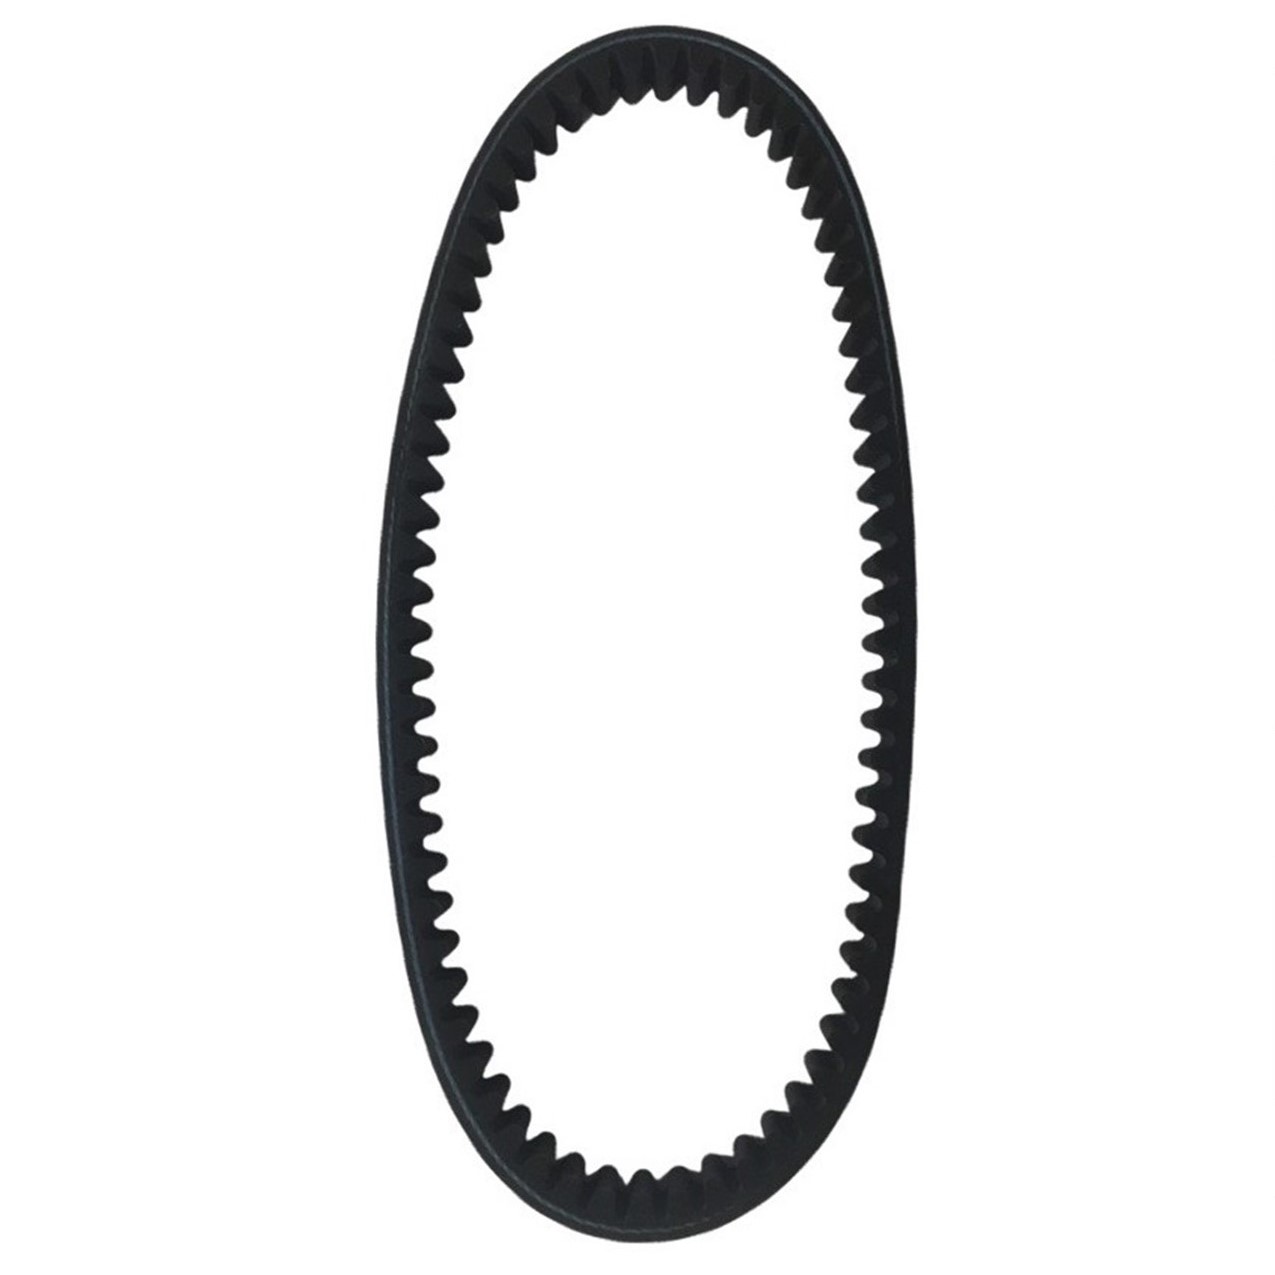 Clutch Drive Belt Fits 2007-2013 E-Ton Viper RXL70, RX4-70, RXL90R, RX4-90R, Rover UK1, Rover GT UK2, Yamaha Raptor 90 09-13 ATVs + other models - Click Image to Close